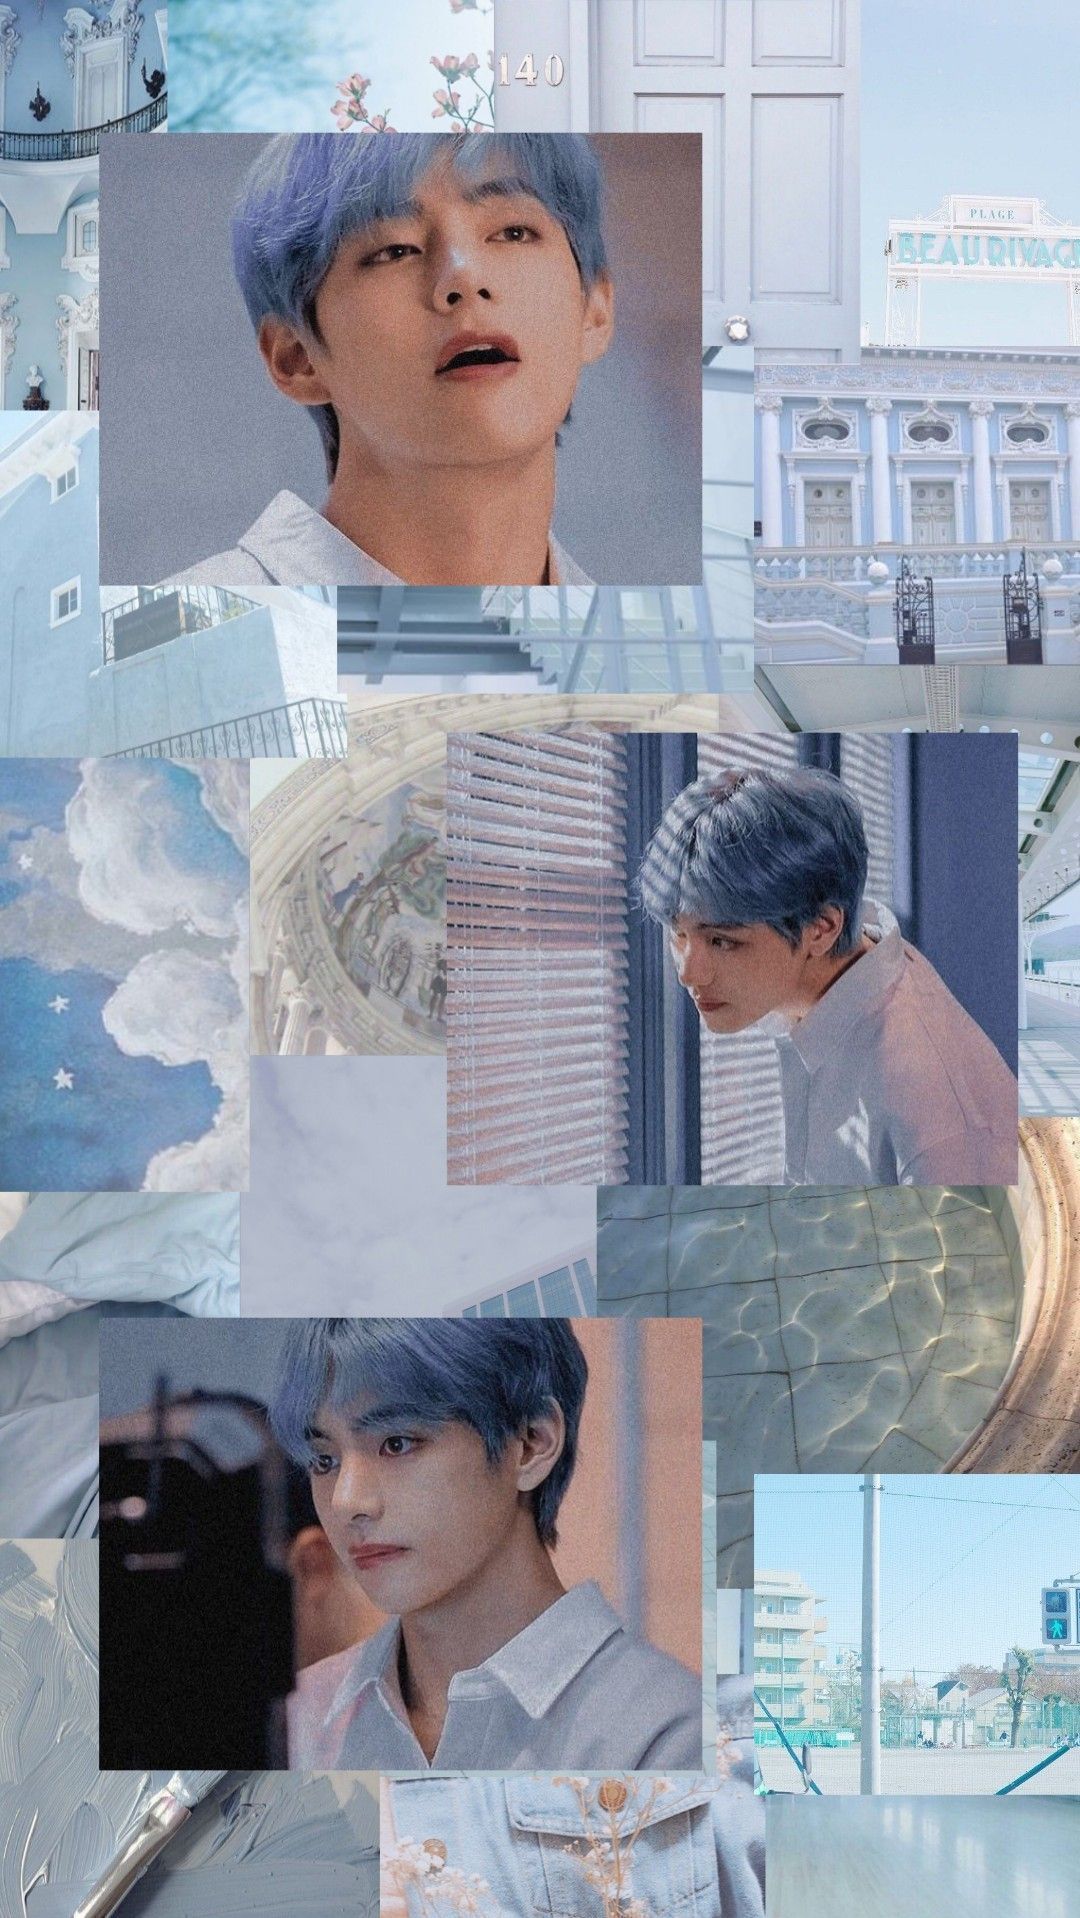 Blue aesthetic wallpaper with Kim Taehyung from BTS di 2020